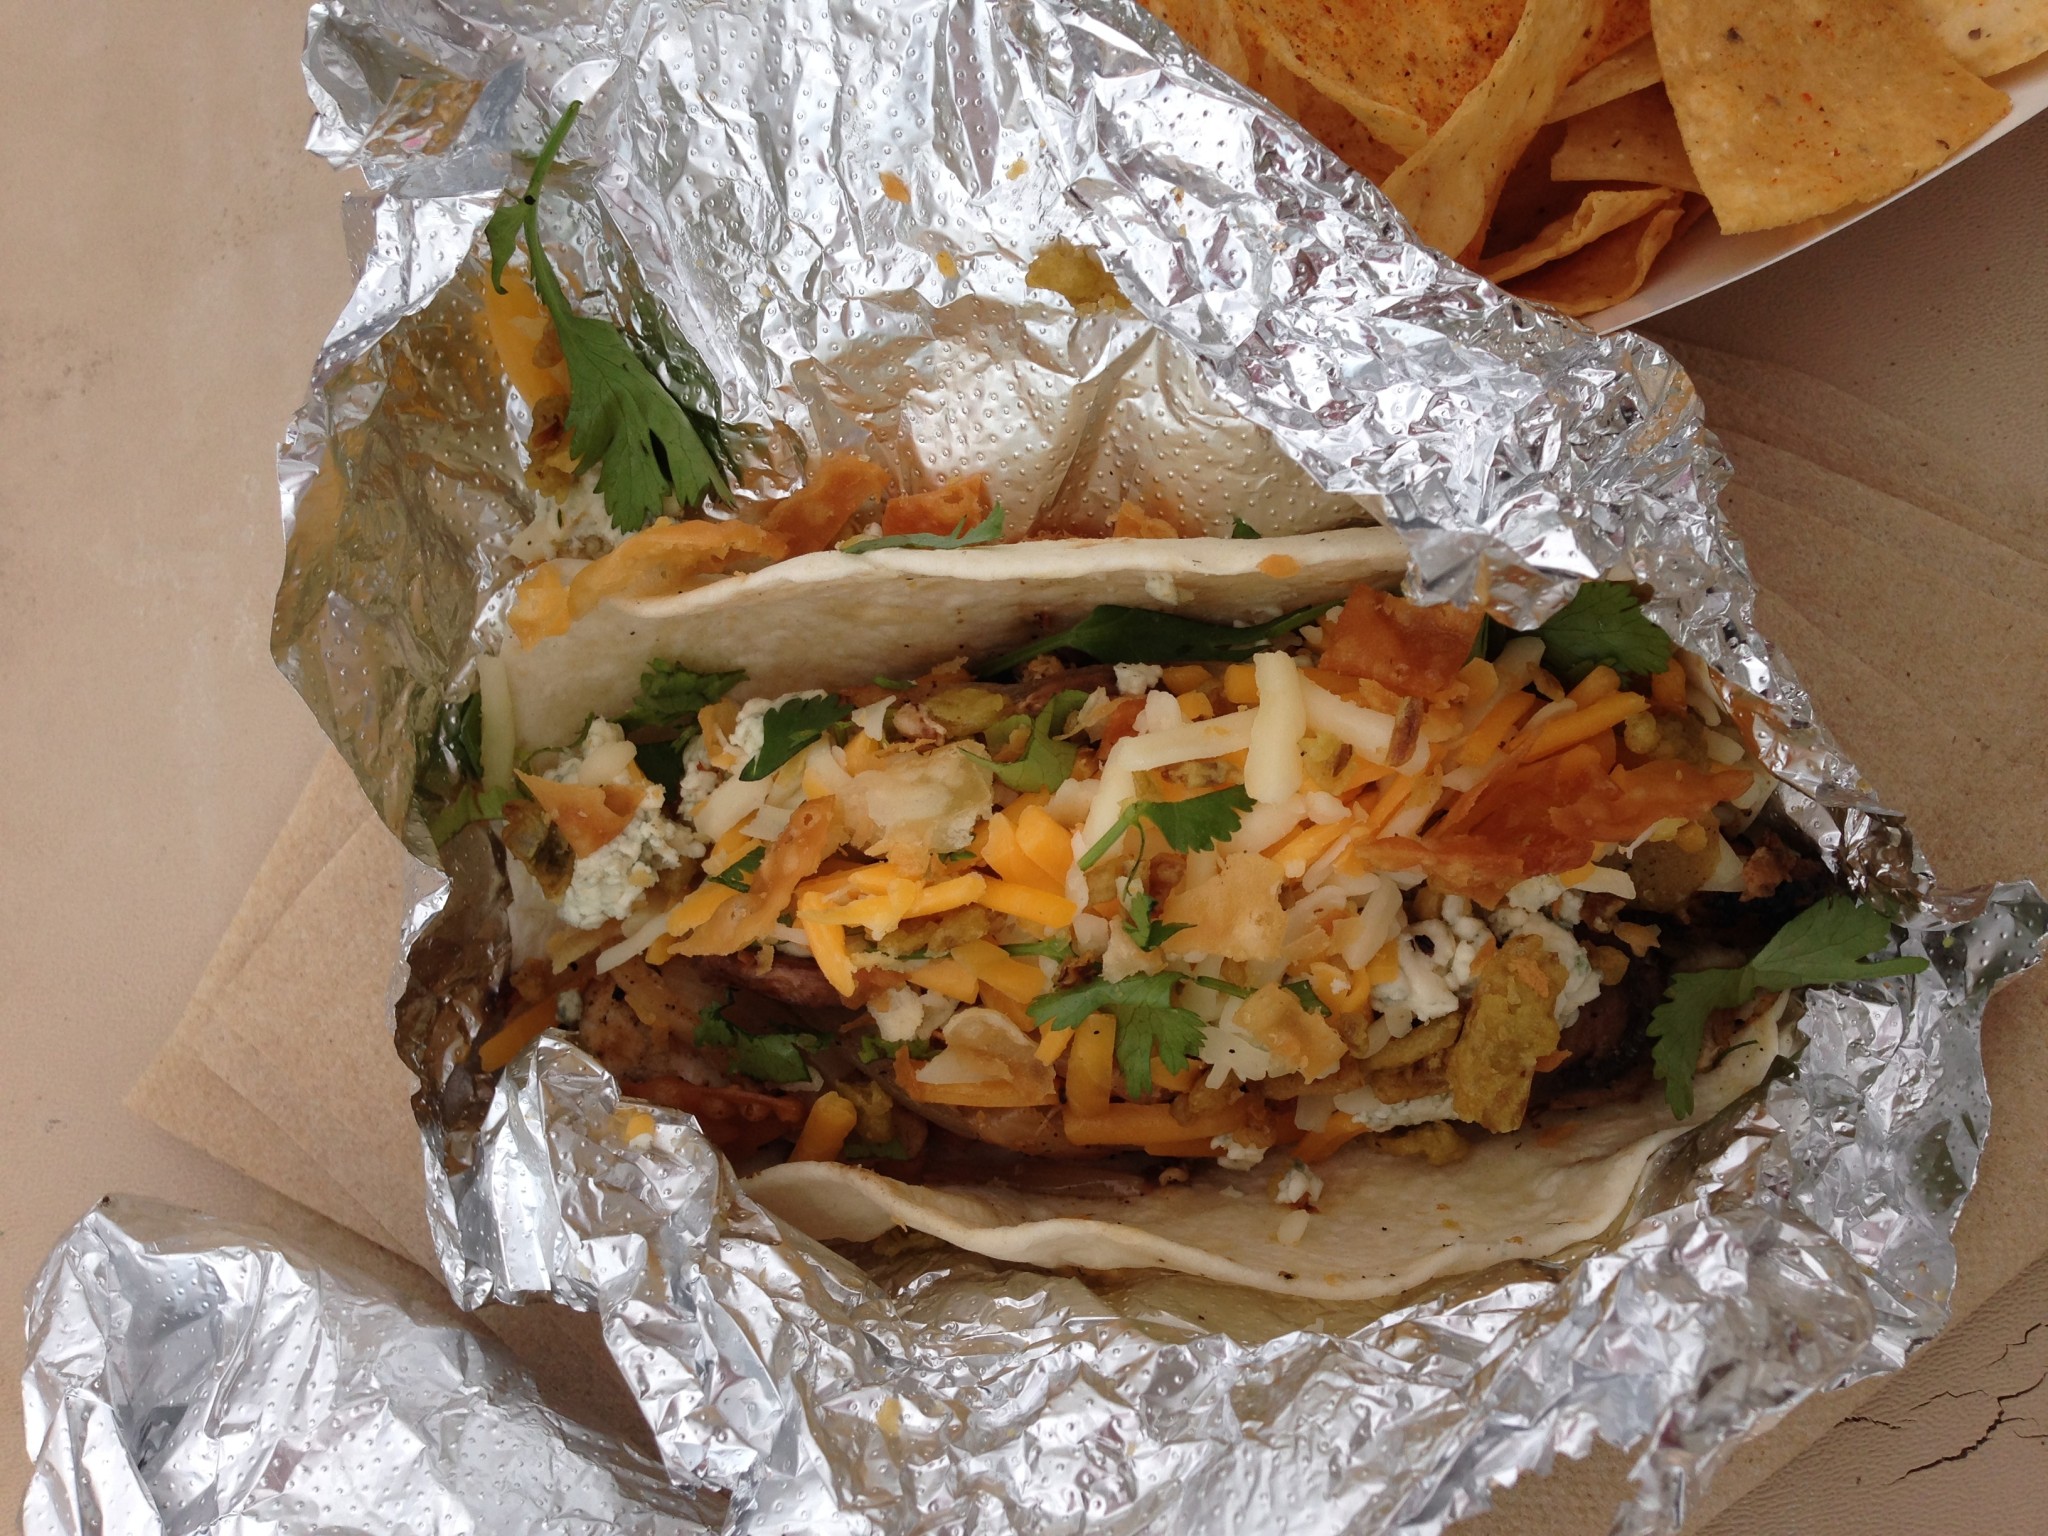 Taste Buds Express - Some of the Better Food Truck Tacos